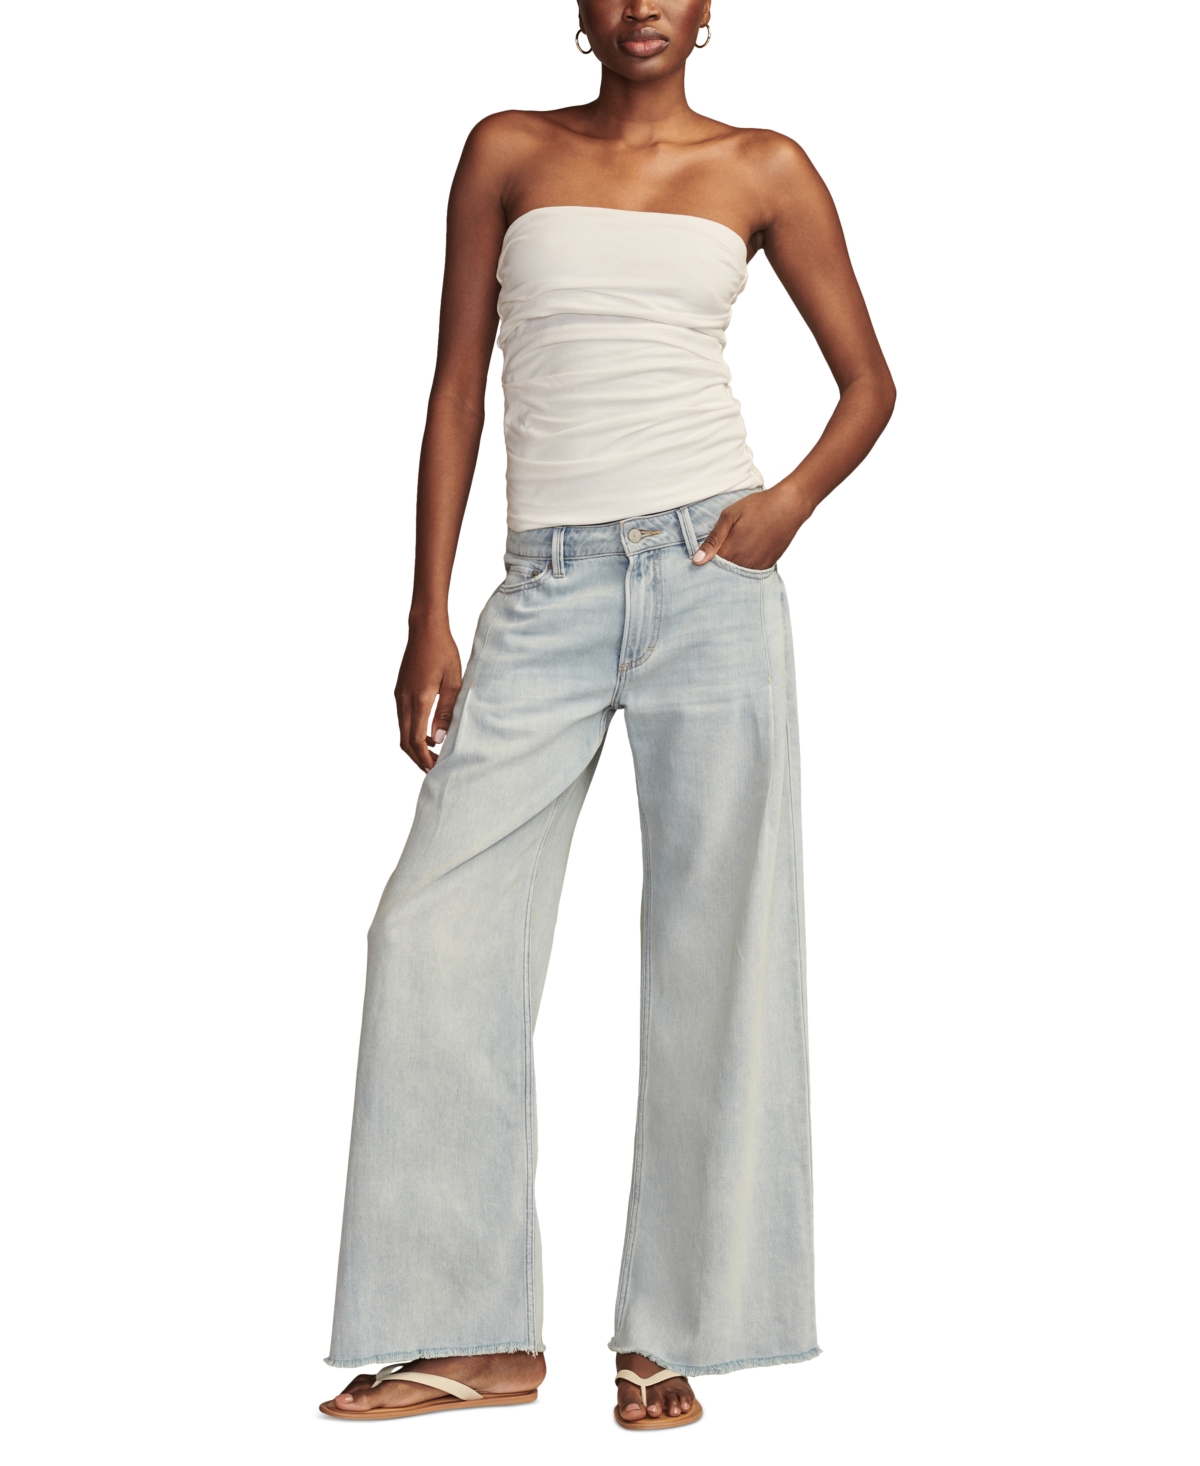 Women's Palazzo Jeans - The Chills